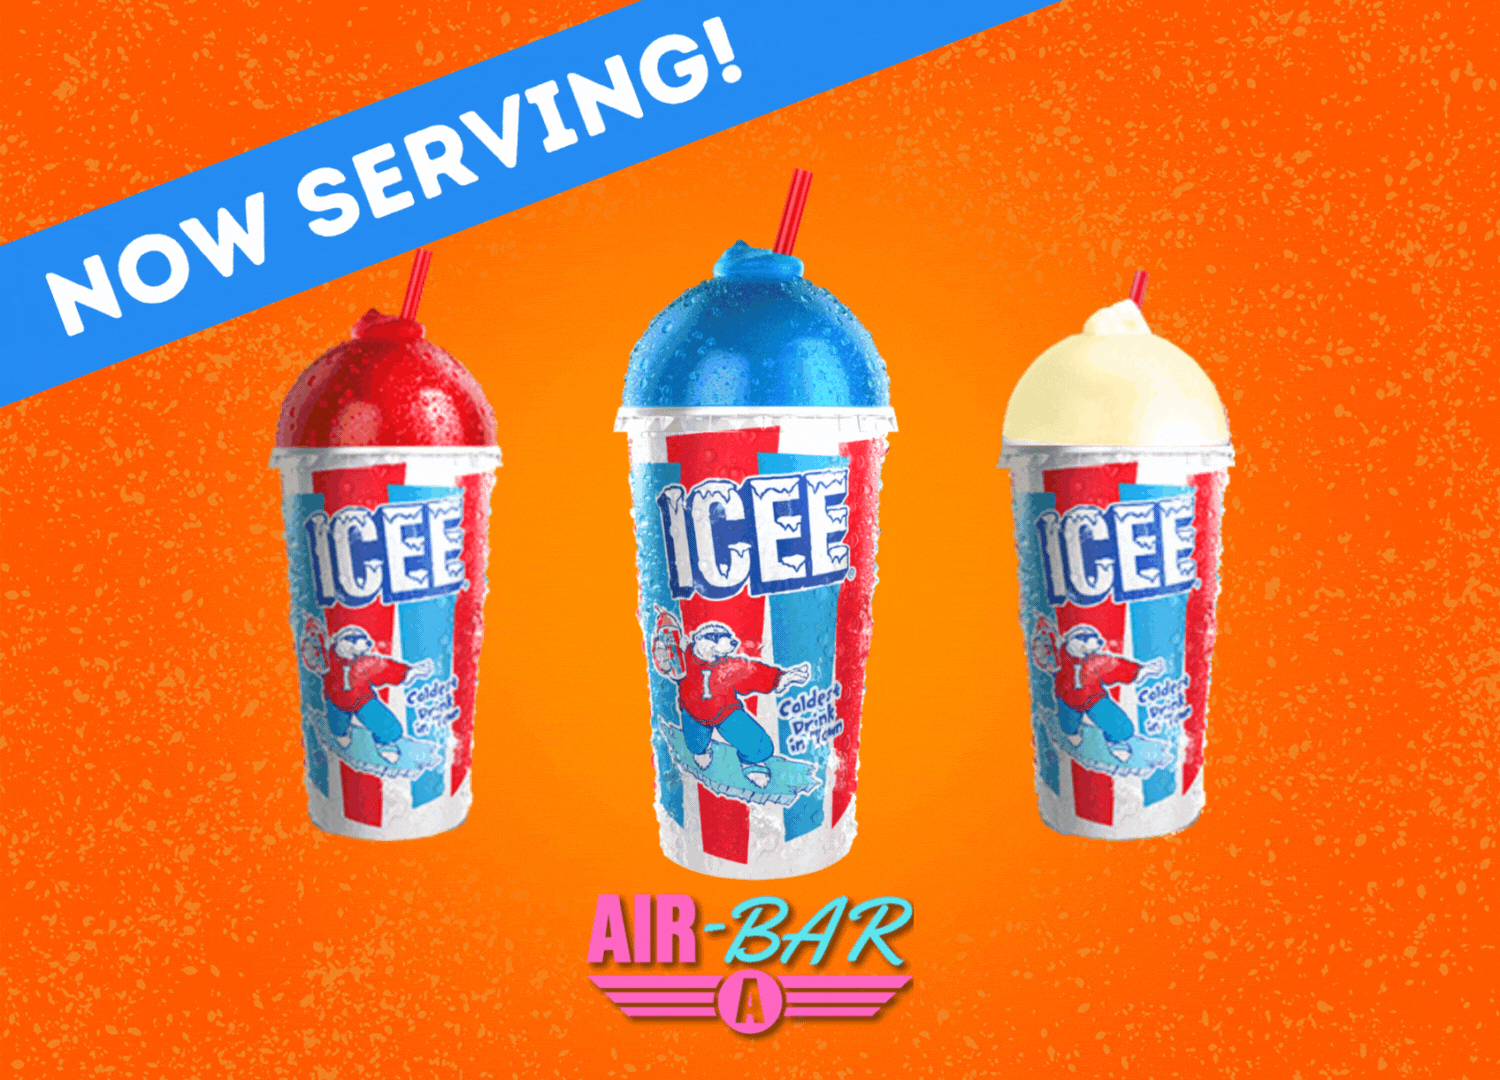 Enjoy refreshing ice treats at Icee Air Bar, a cool spot to chill out.